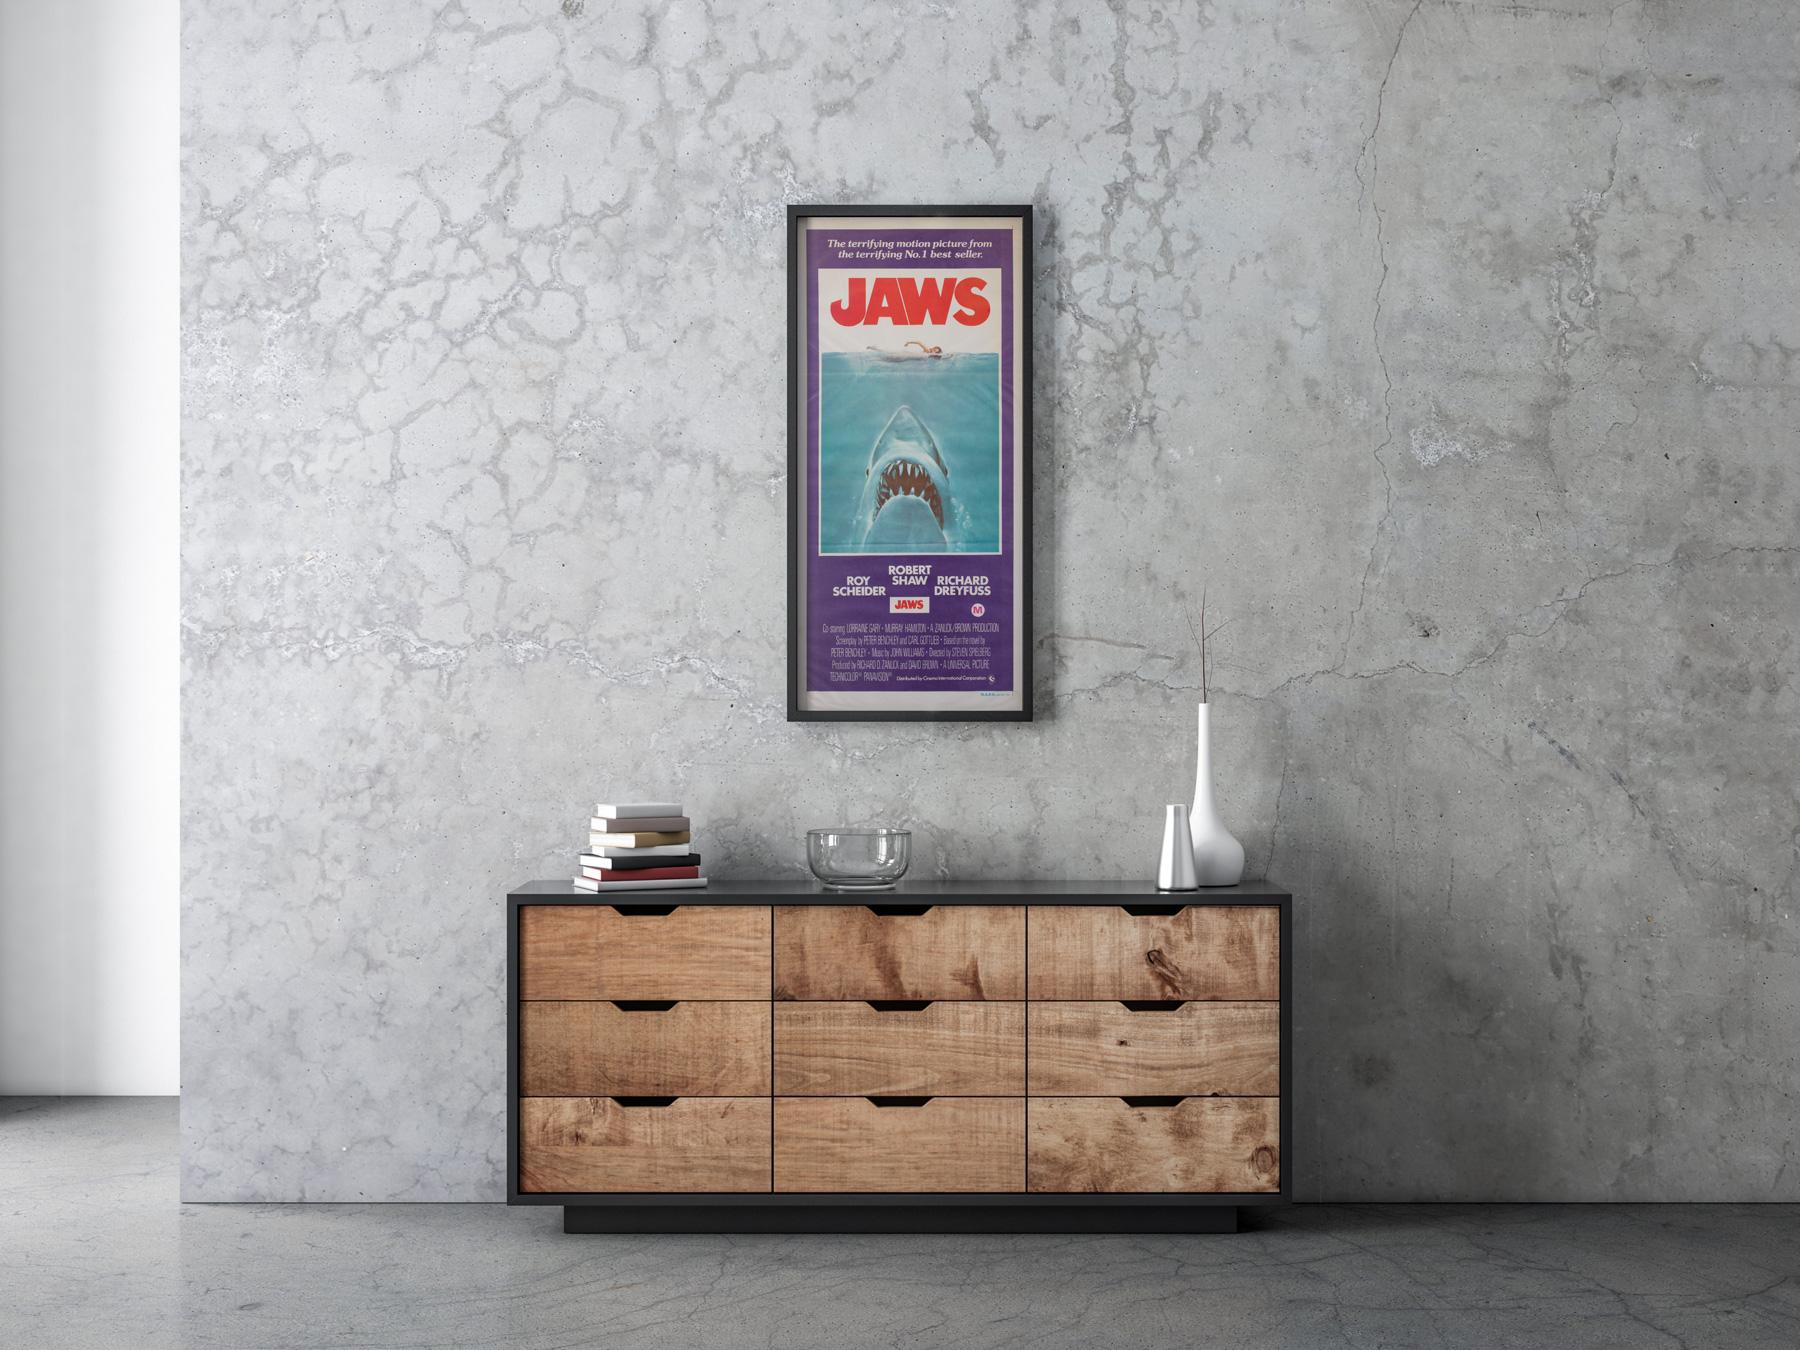 Featuring the same classic Roger Kastel artwork, the Jaws Australian Daybill is a great, collectable item and more affordable alternative to the country-of-origin US poster.

This vintage movie poster is sized 13 3/8 x 29 3/4 inches. It will be sent